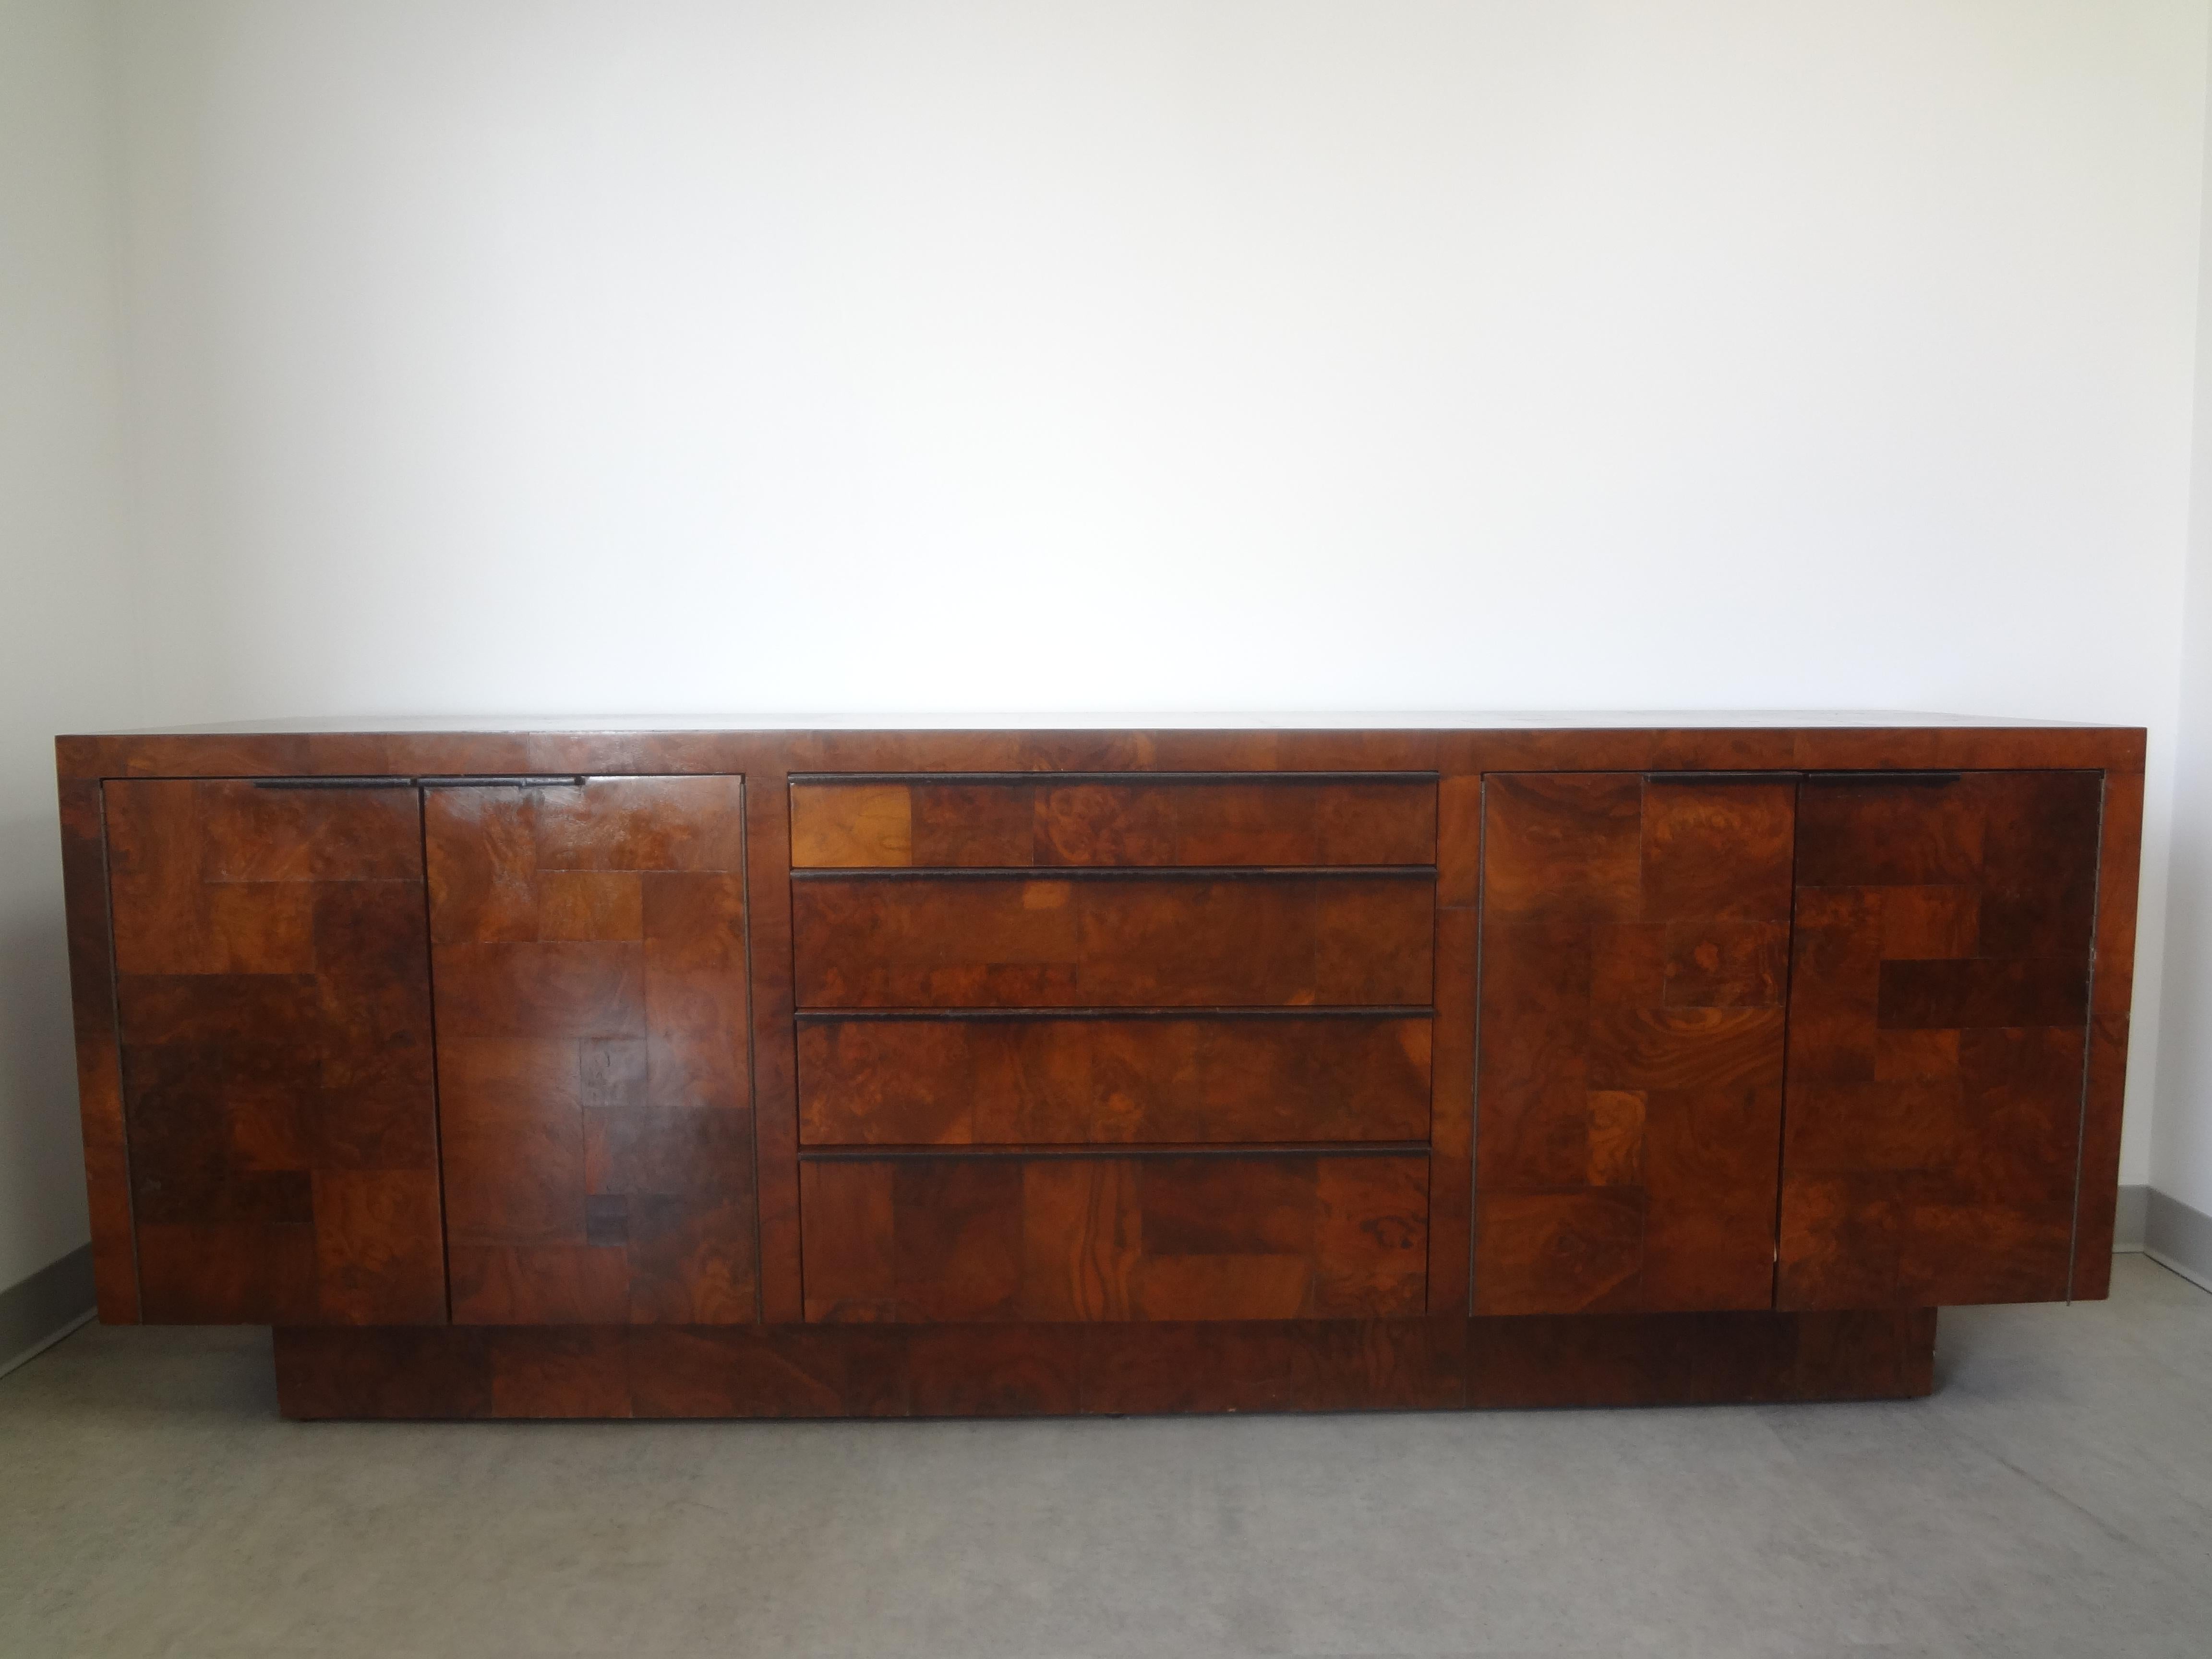 Paul Evans Cityscape patchwork burlwood credenza. This stunning long mid-century Paul Evans for Directional credenza or chest is comprised of cabinets on either side each with a shelf, 4 drawers in the center resting on a raised plinth.